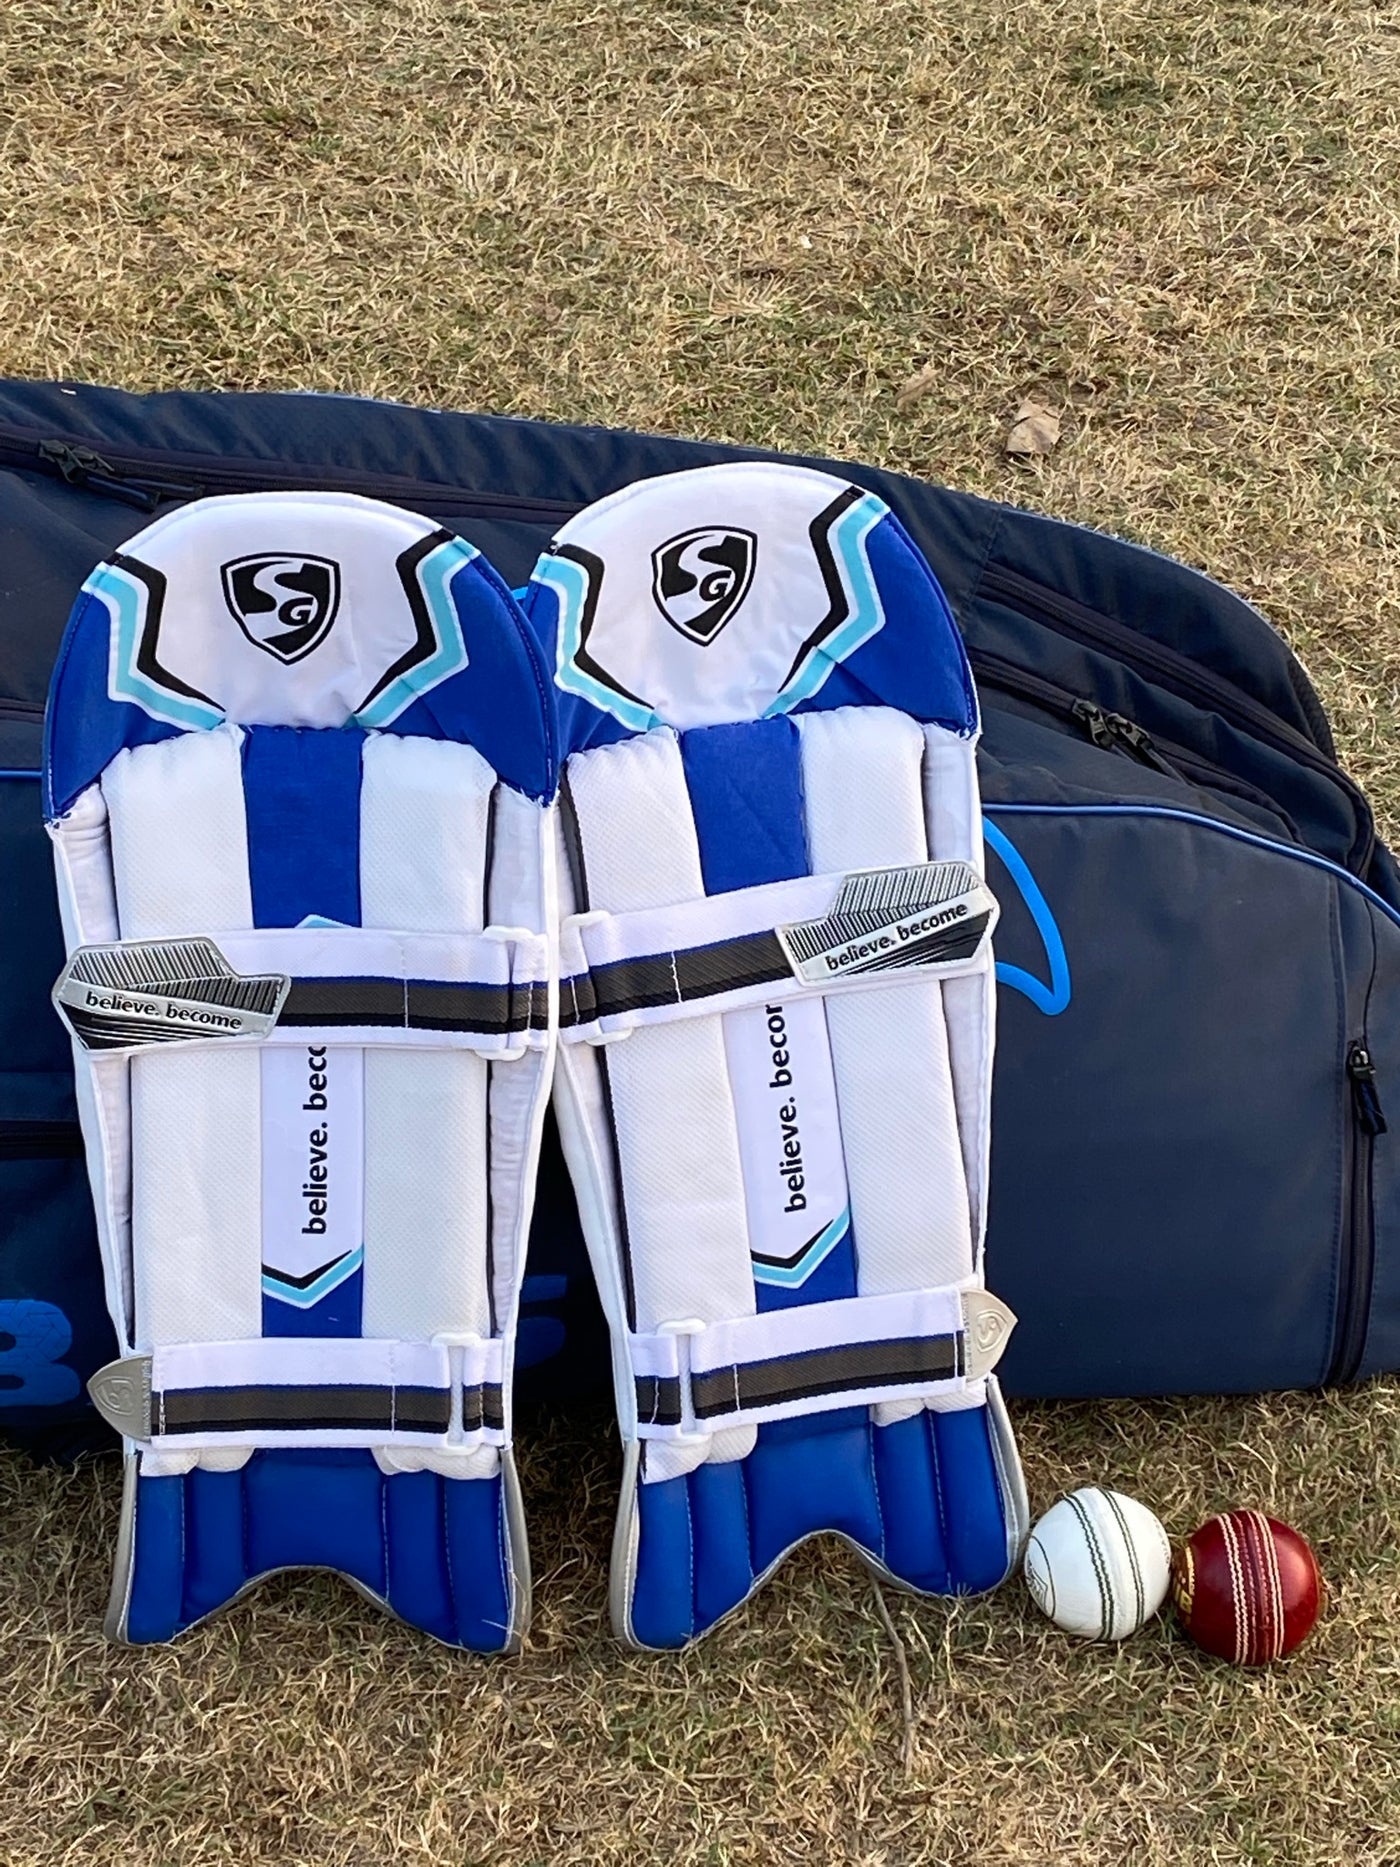 SG Super Test Wicket Keeping Pads